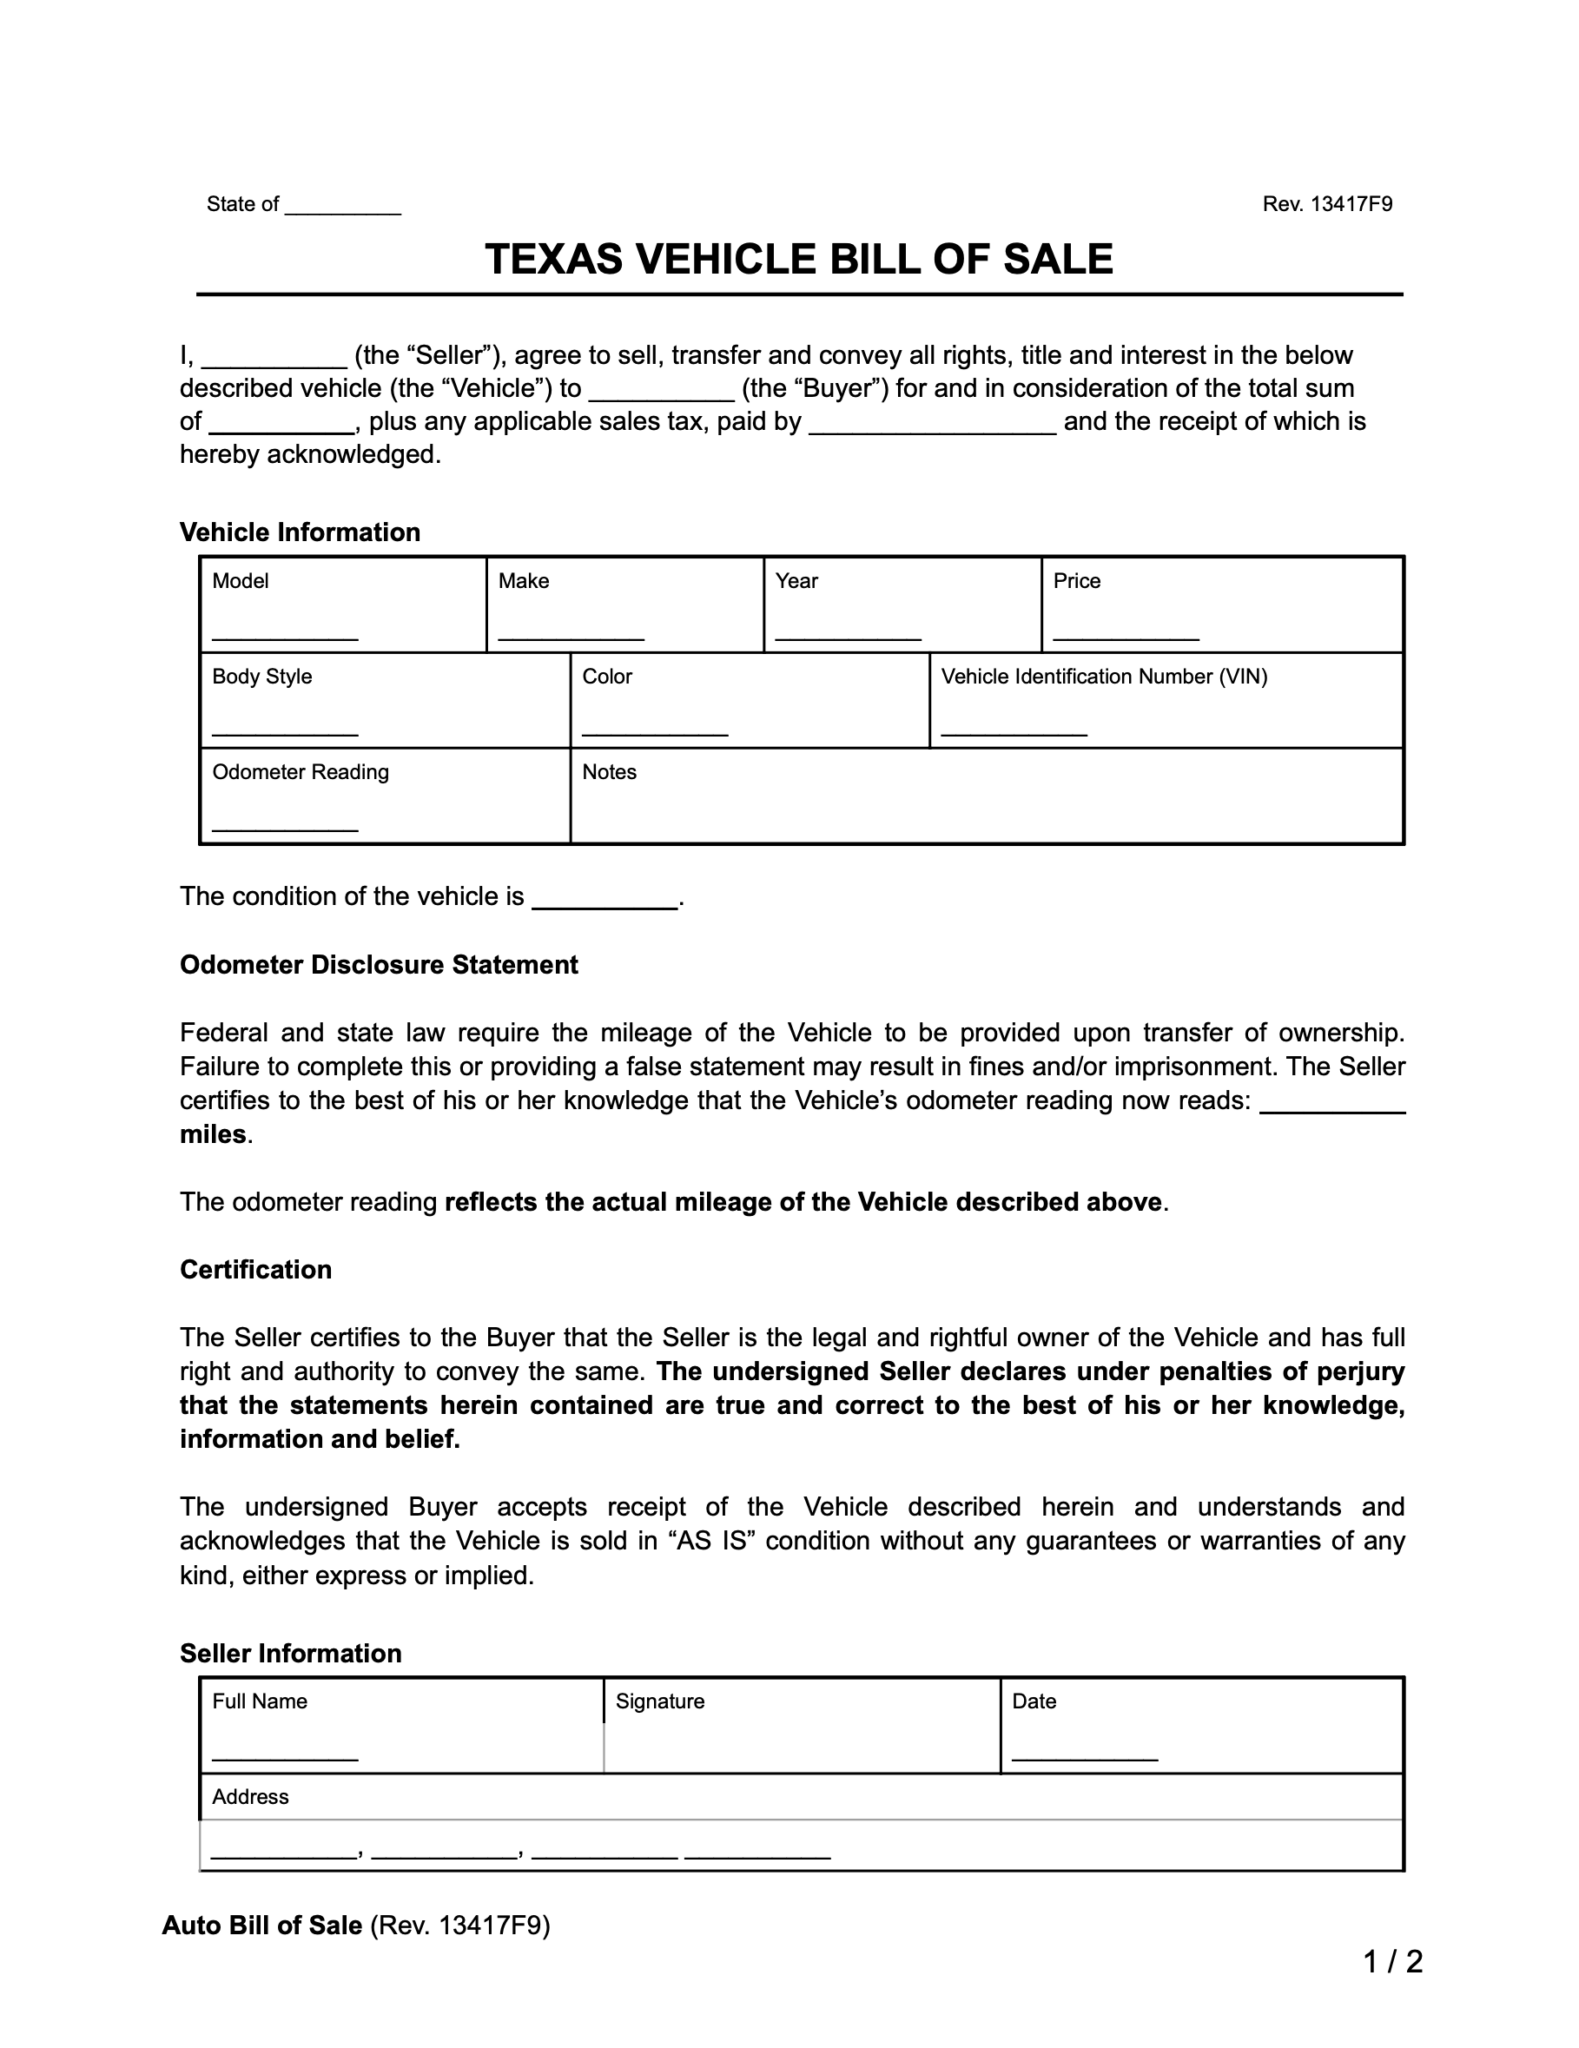 free-texas-motor-vehicle-bill-of-sale-form-legal-templates